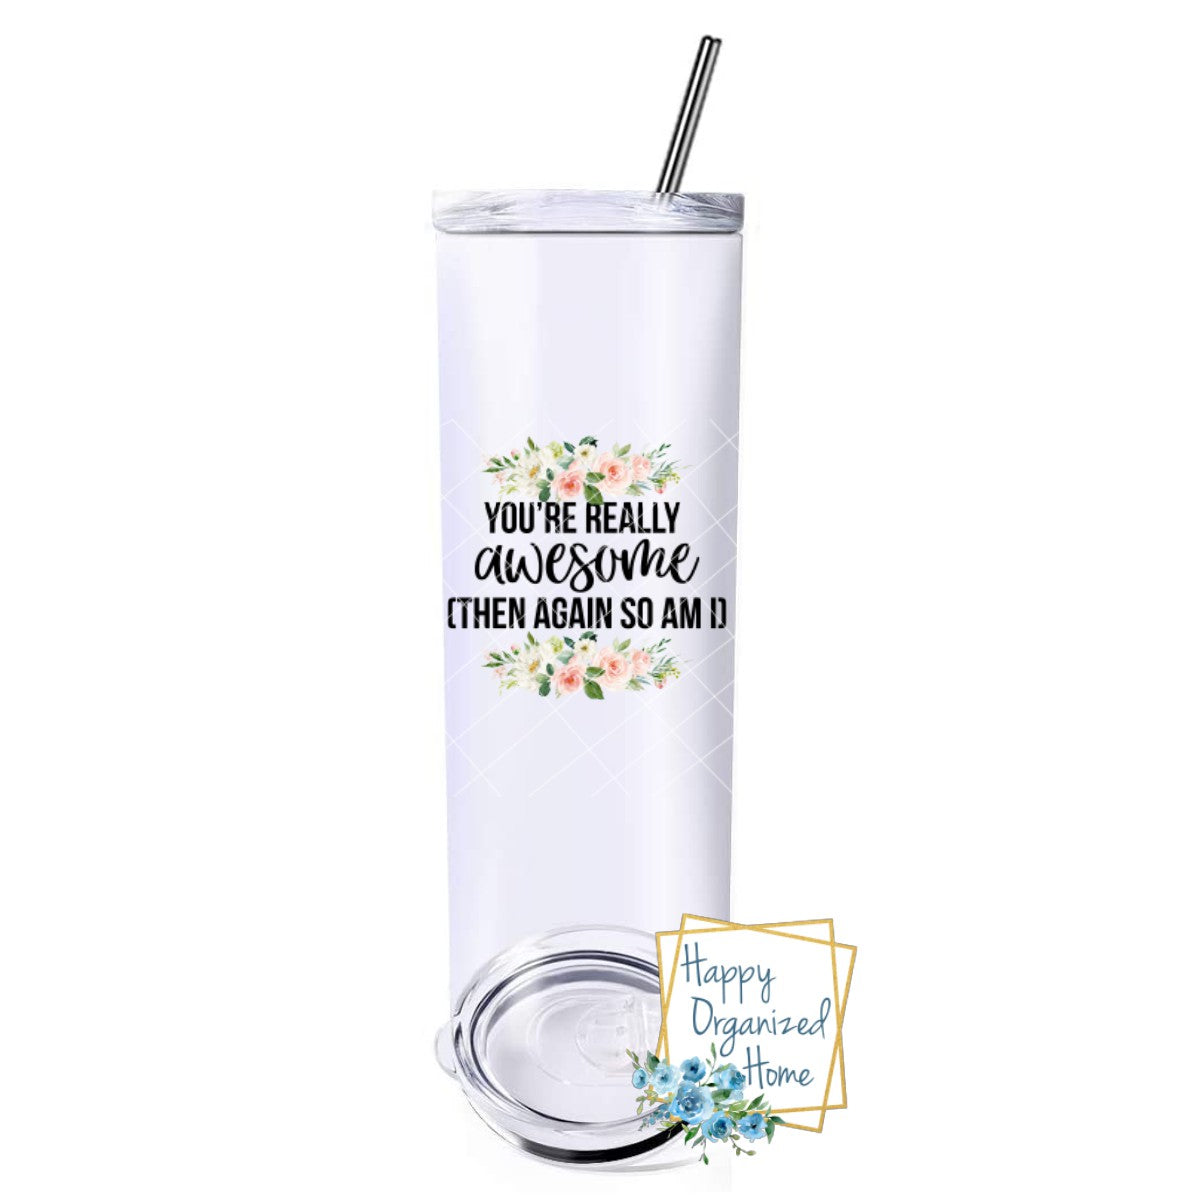 You're really Awesome, then again so am I - Insulated tumbler with metal straw